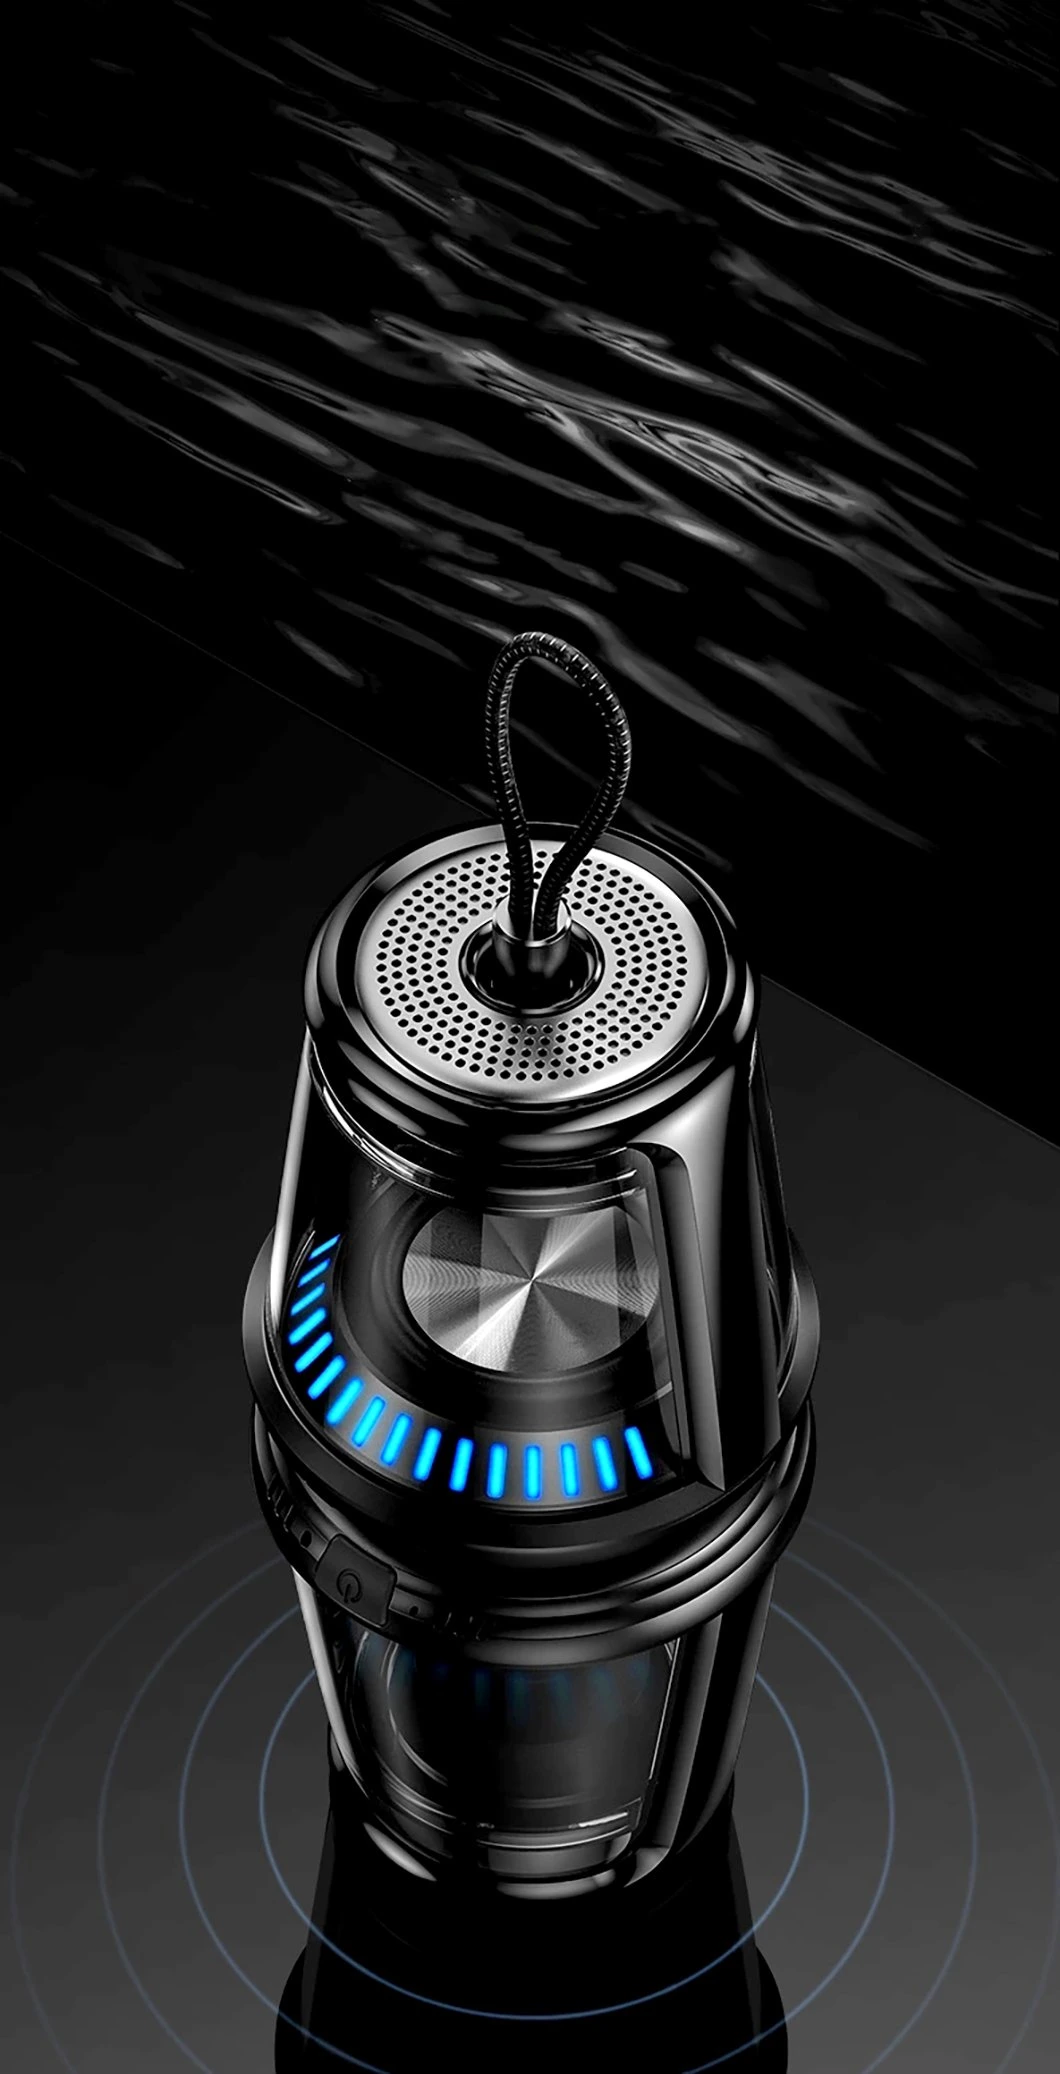 The Global Latest Technology Waterproof Lighthouse Wireless Speakers Portable